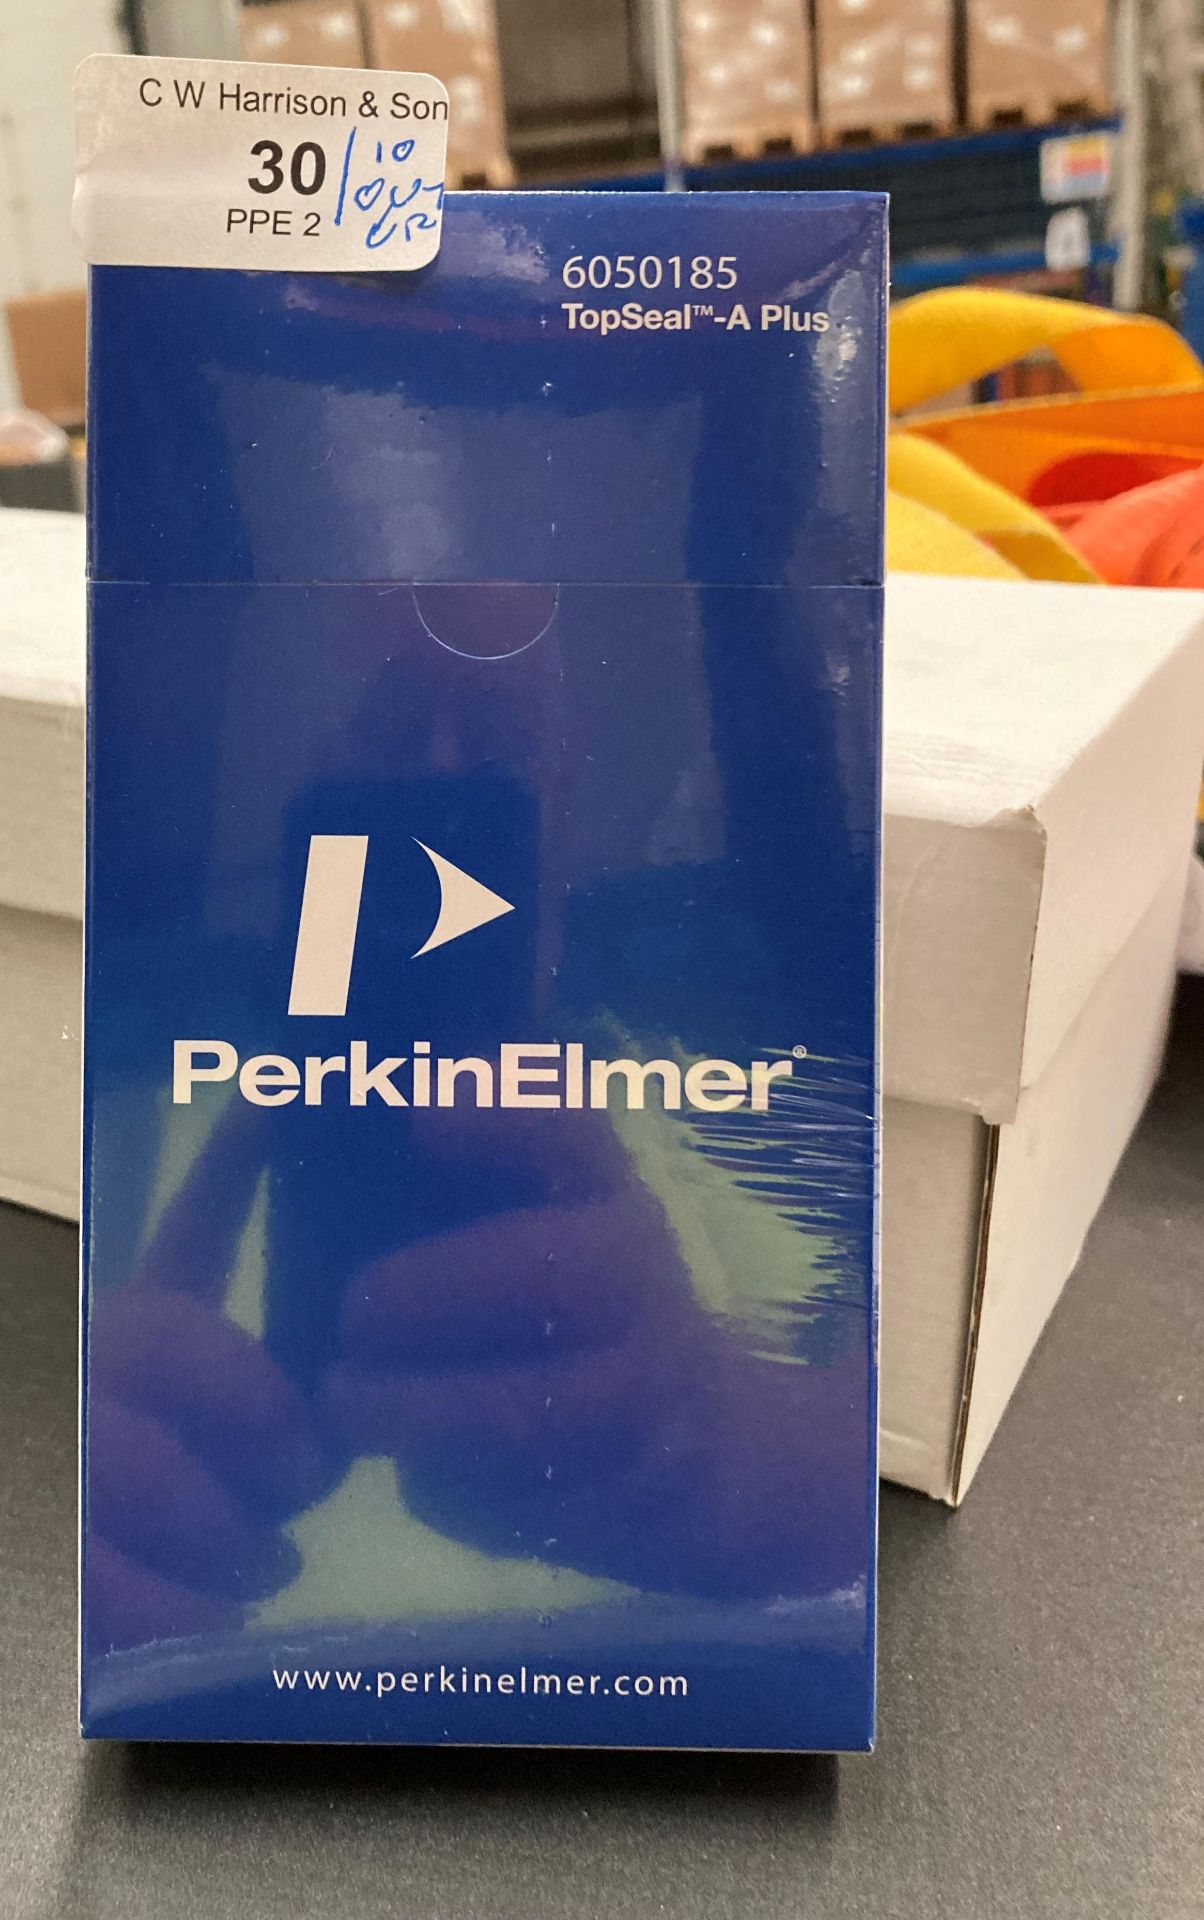 200 x Packs of PerkinElmer Top Seal - A Plus 6050185 clear adhesive microplate seals - 100 units - Image 5 of 5